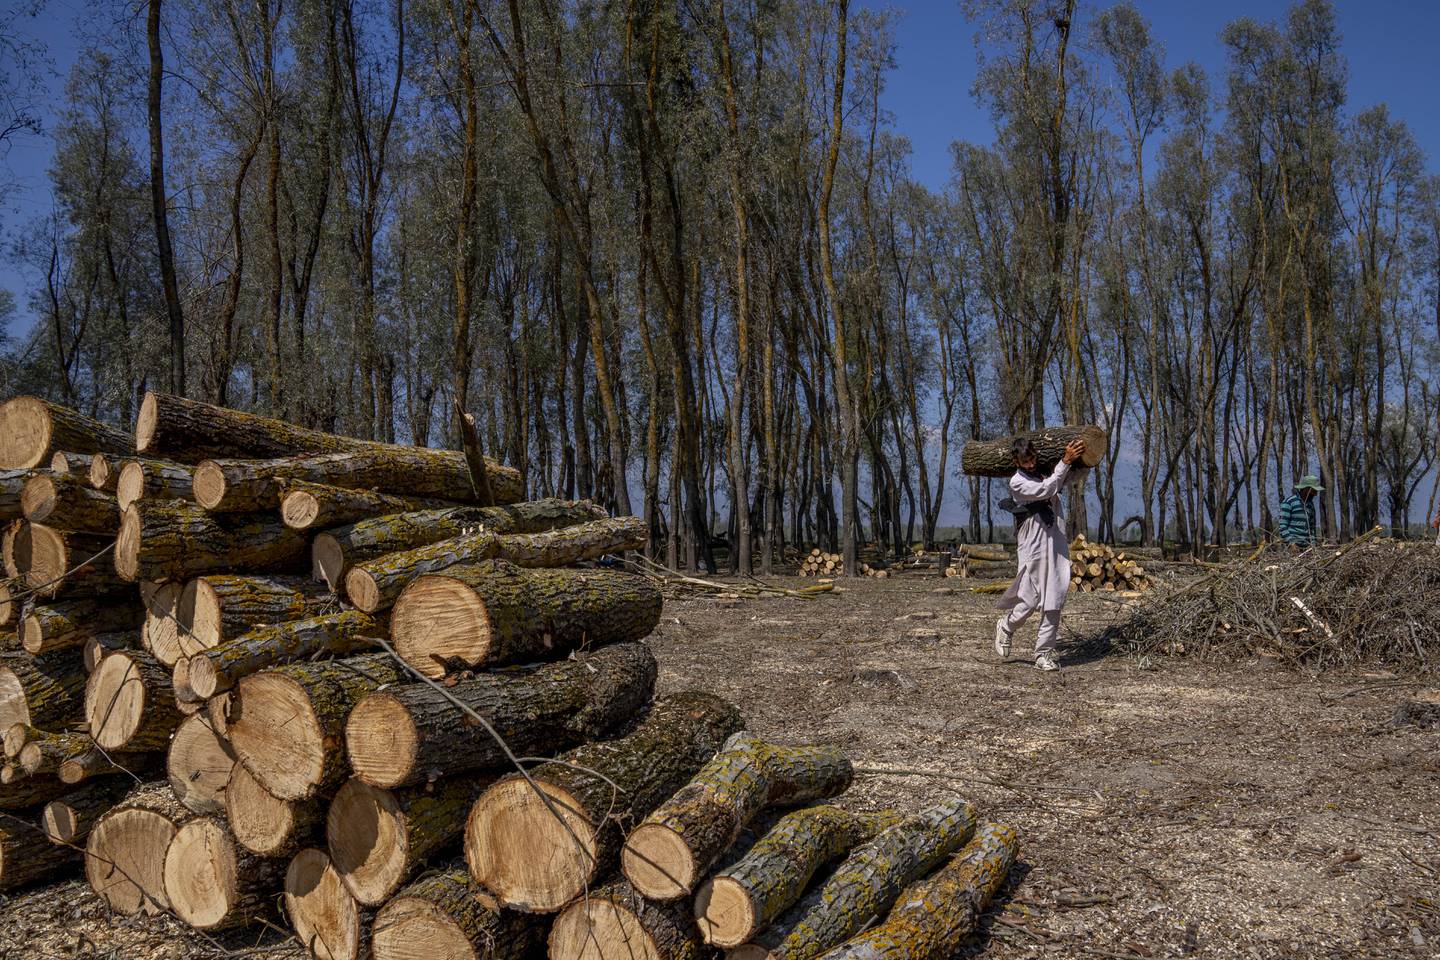 Willow logs after cutting down trees over a government wetland at Haretaar, north of Srinagar. AP Photo